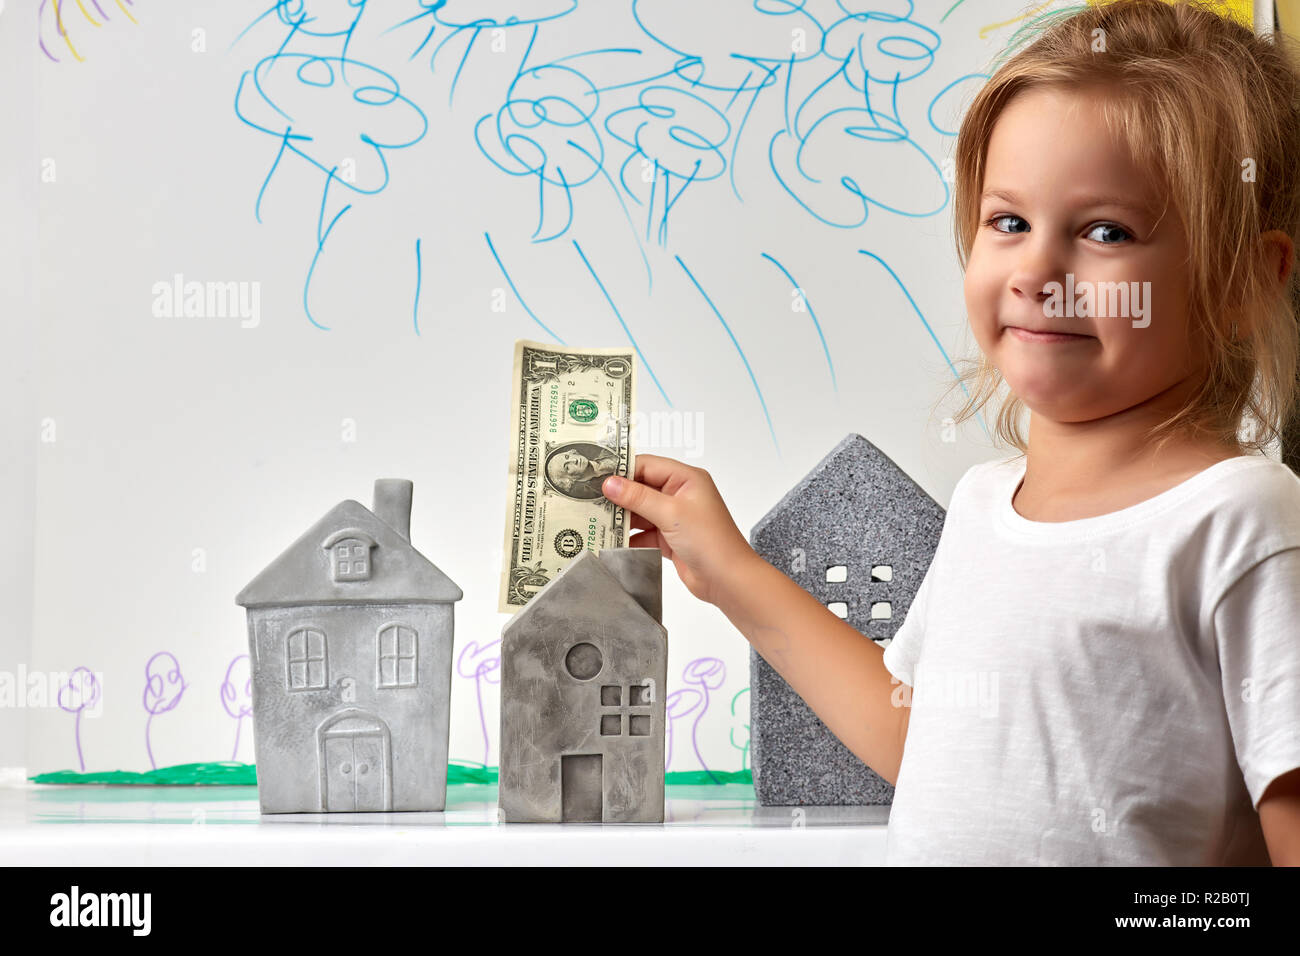 Girl with money standing near toy houses Stock Photo